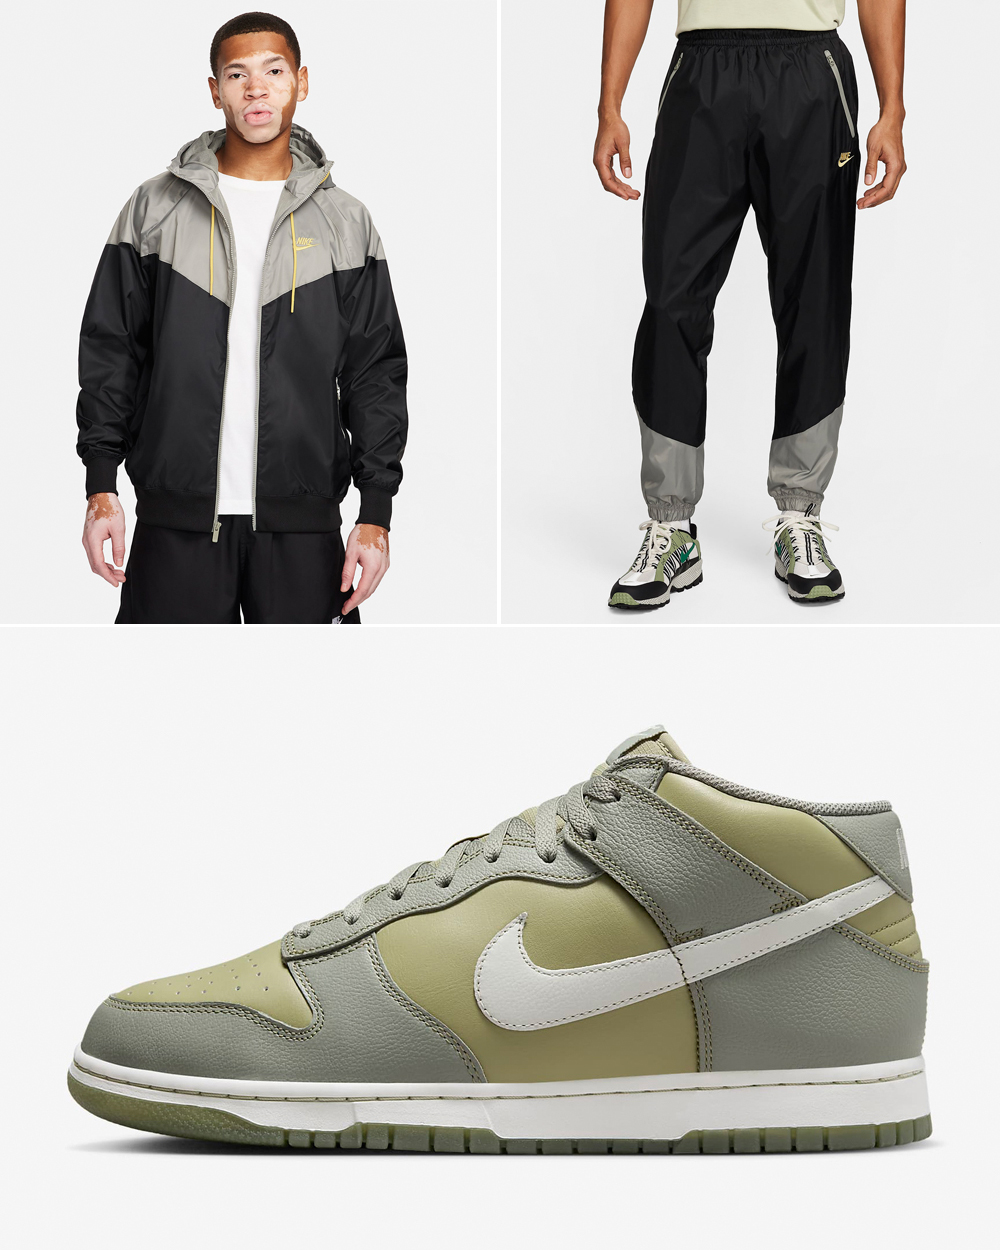 Nike Dunk Mid Dark Stucco Jacket Pants Matching Outfit